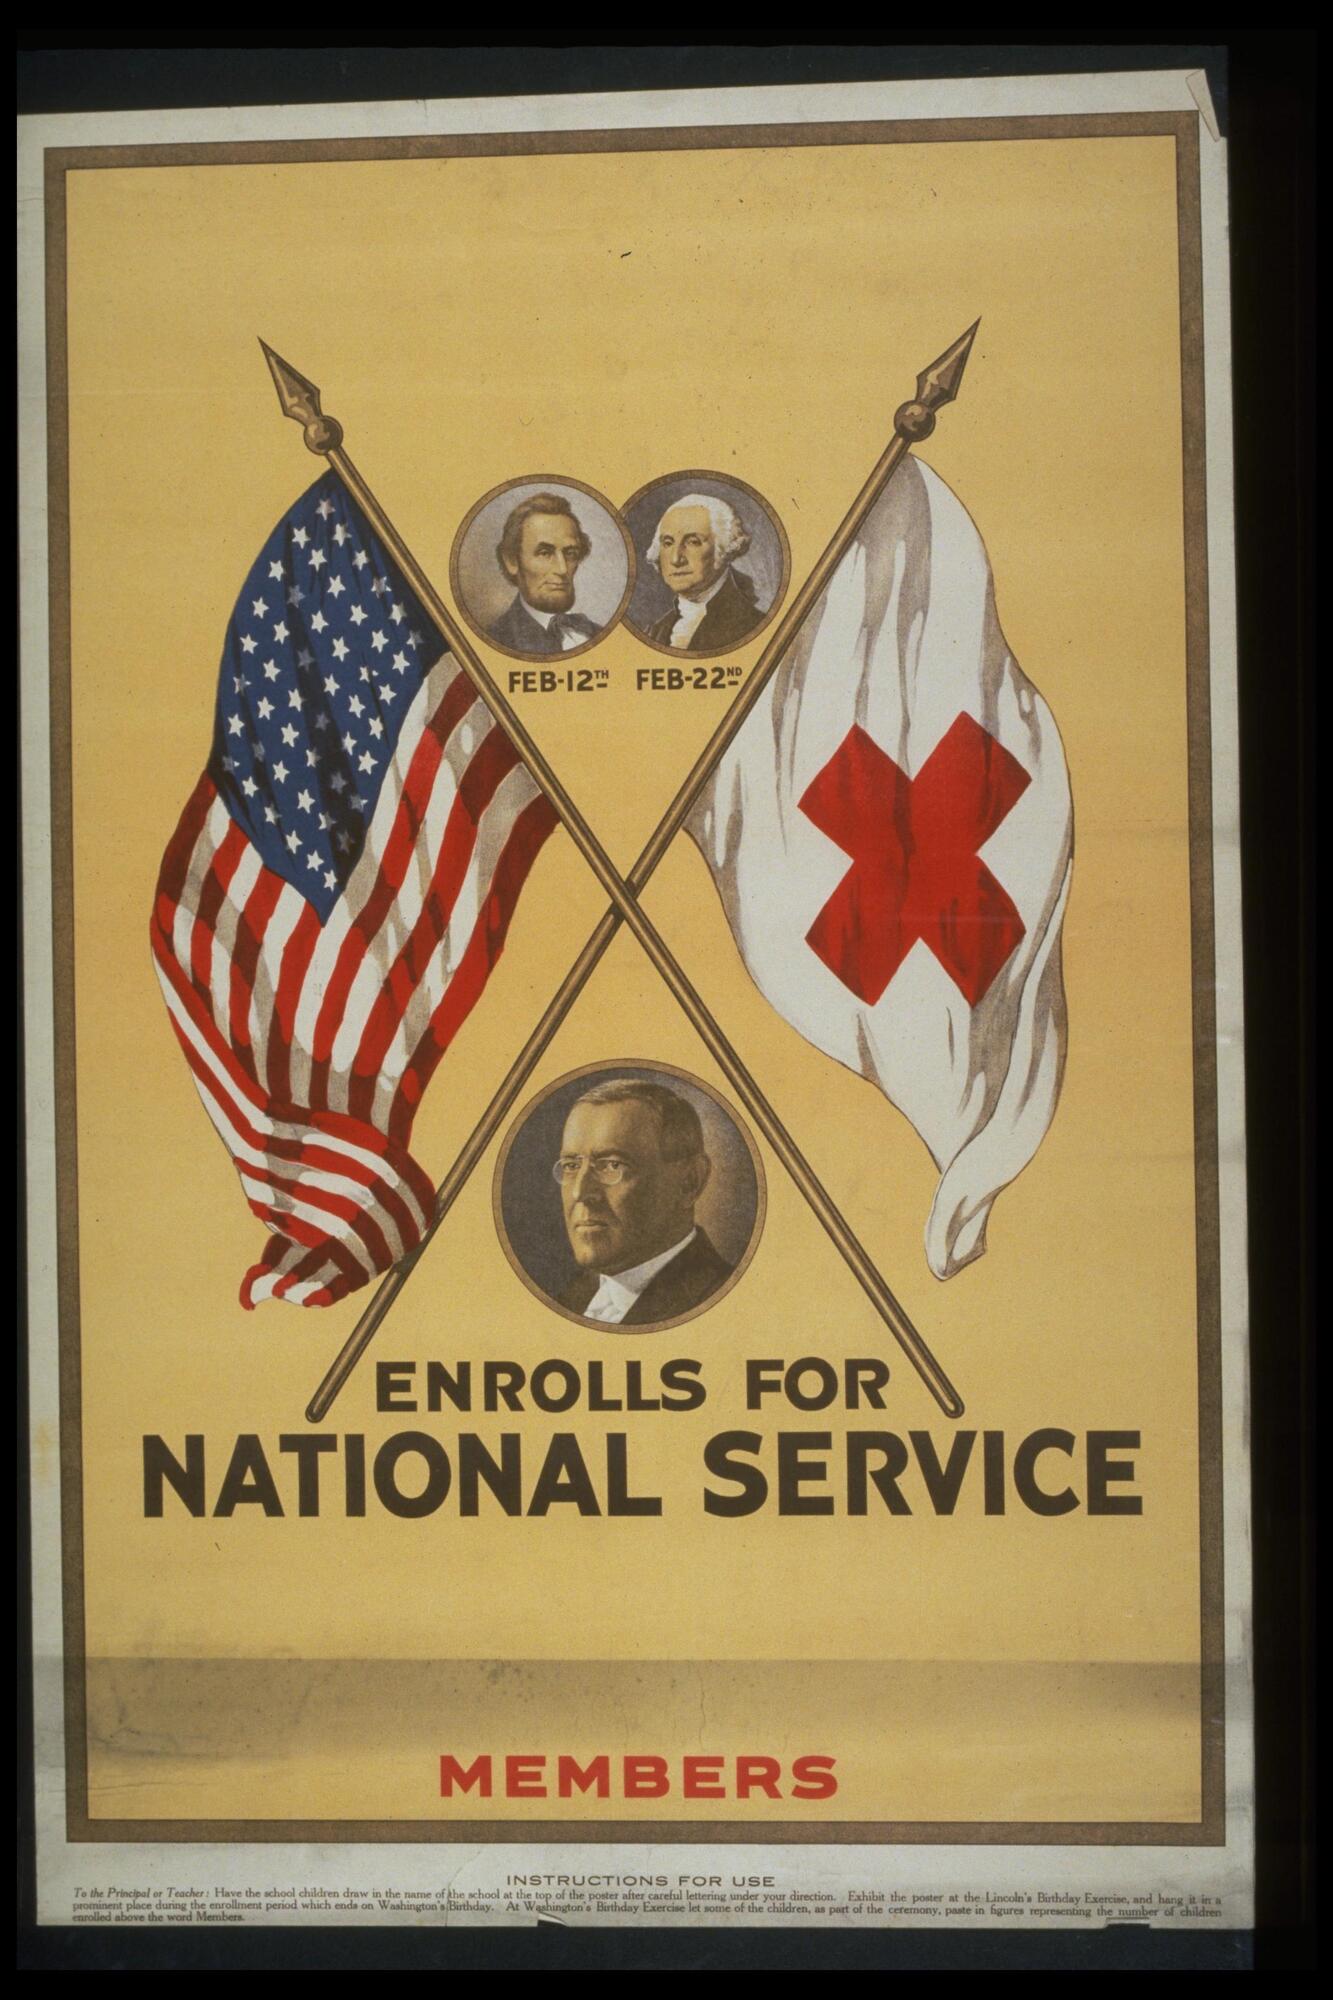 Text: Enrolls for National Service - Members - Instructions For Use - To the Principal or Teacher: Have the school children draw in the name of the school at the top of the poster after careful lettering under your direction. Exhibit the poster at the Lincoln&#39;s Birthday Exercise, and hang it in a prominent place during the enrollment period which ends on Washington&#39;s Birthday. At Washington&#39;s Birthday Exercise let some of the children, as part of the ceremony, paste in figures representing the number of children enrolled above the word Members.